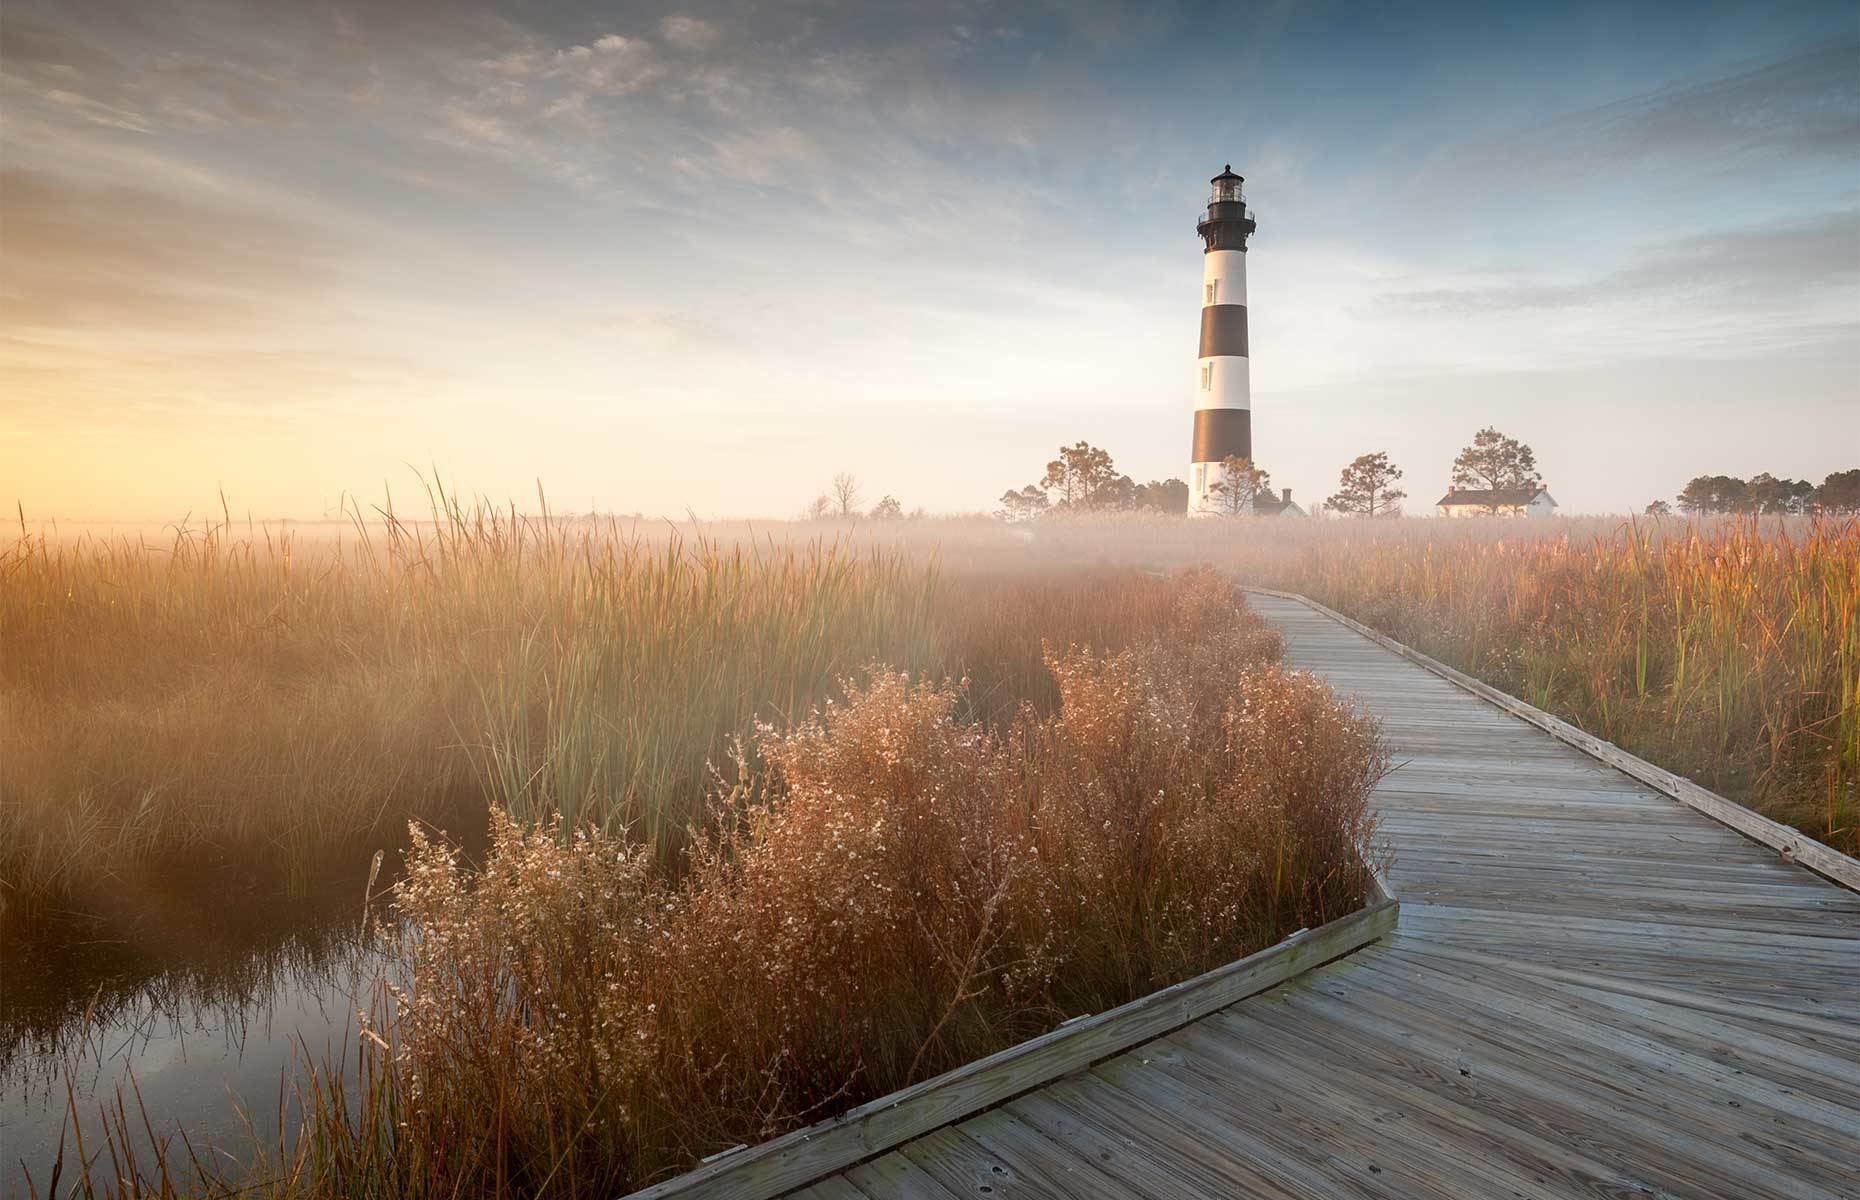 <p class="p1"><span>Cape Hatteras offers visitors <a href="https://hatterasguide.com/" rel="noreferrer noopener"><span>all sorts of seaside activities</span></a>, but don’t forget to visit its <a href="https://hatterasguide.com/listings/recreation-and-activities--things-to-do-/cape-hatteras-lighthouse" rel="noreferrer noopener"><span>iconic lighthouse</span></a>. Its black and white spirals will be the highlight of all your photos.</span></p>